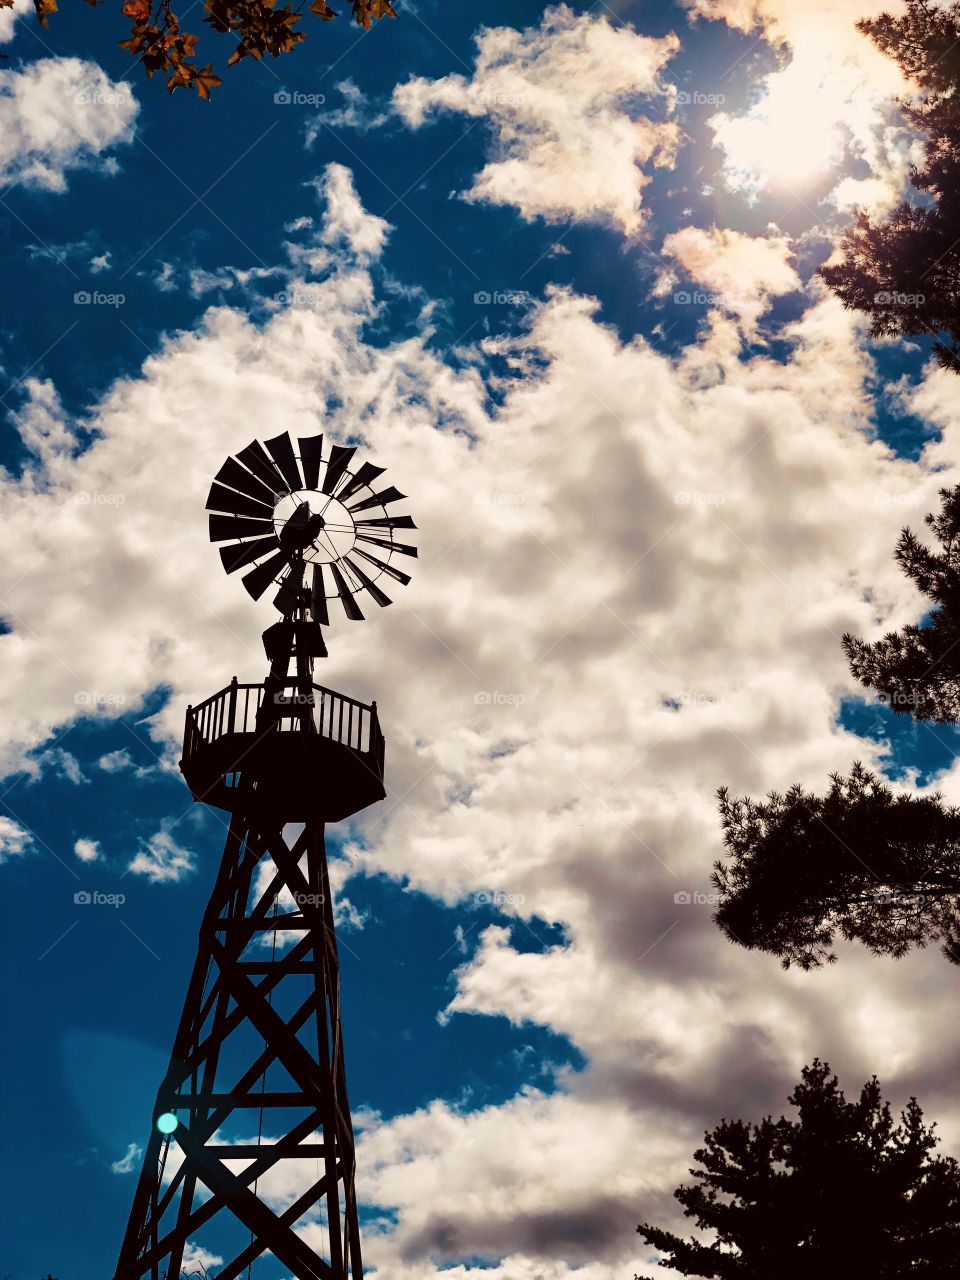 Silhouette Of A Windmill In The Sky, Silhouette Of A Windmill, On A Farm, New York Farms, Windmills In New York, Teddy Roosevelt’s Farm, Theodore Roosevelt’s Home, Silhouette In The Sky